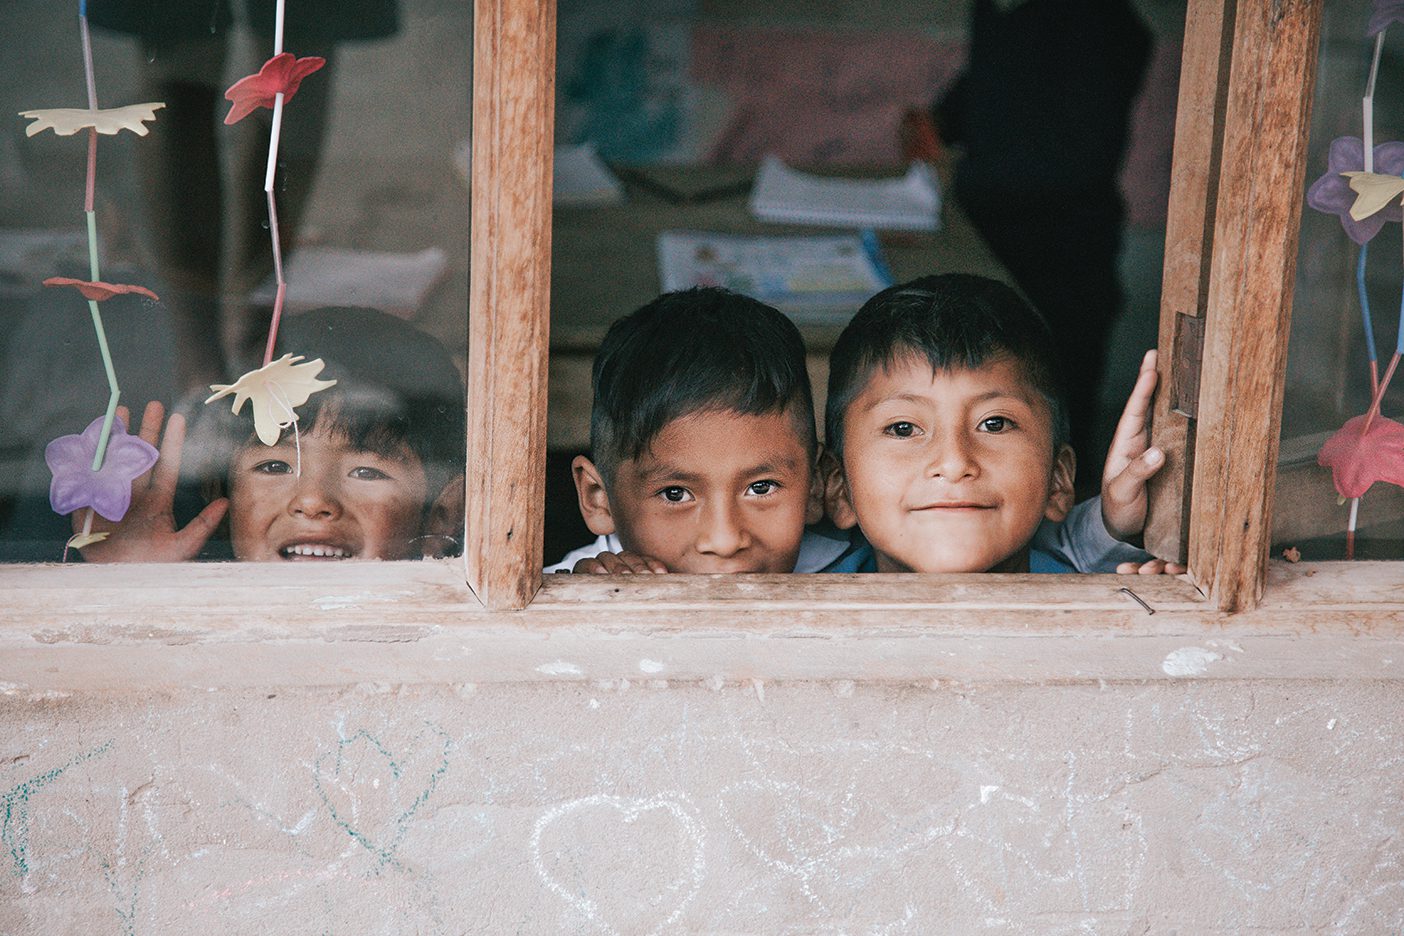 Three smiling Bolivian children look at the camera through a window.